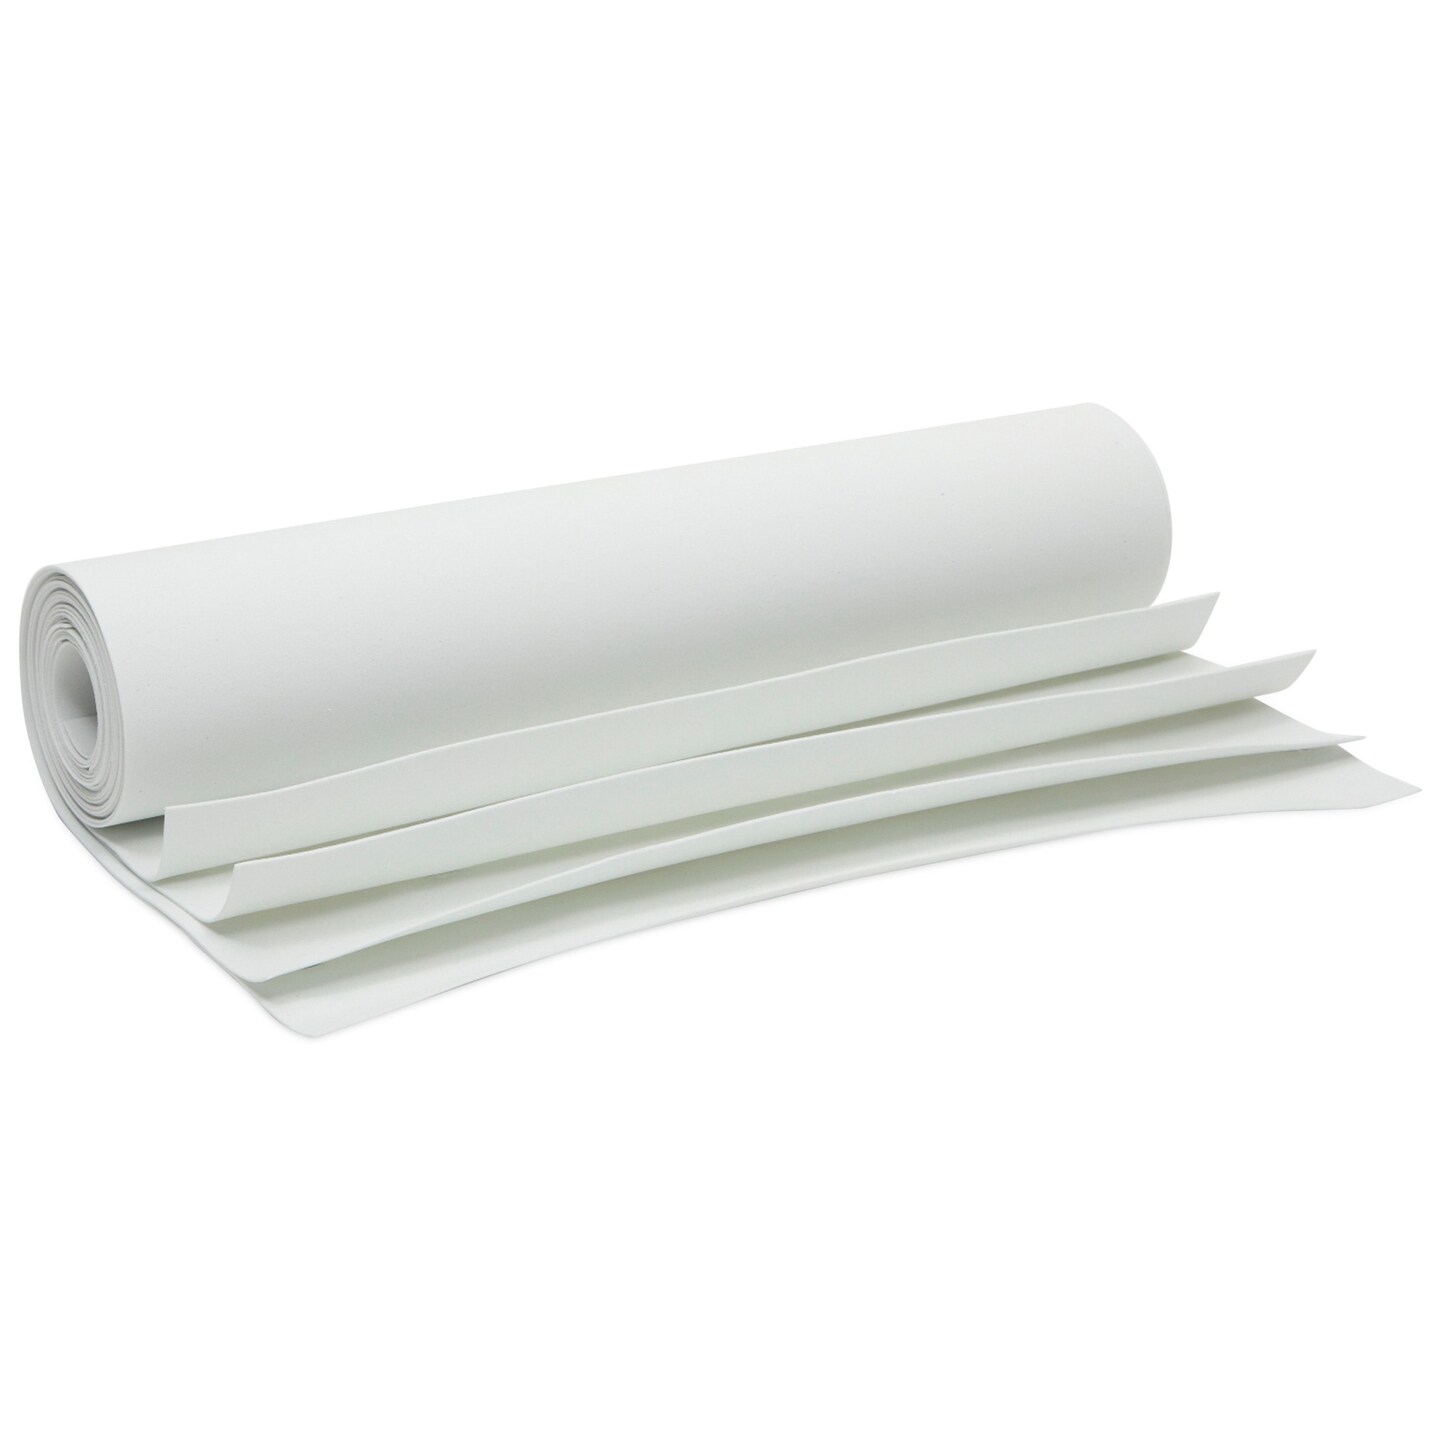 White EVA Foam Sheets for Cosplay, Arts and Crafts Supplies (1mm, 13.7 x 39 In, 4 Pack)